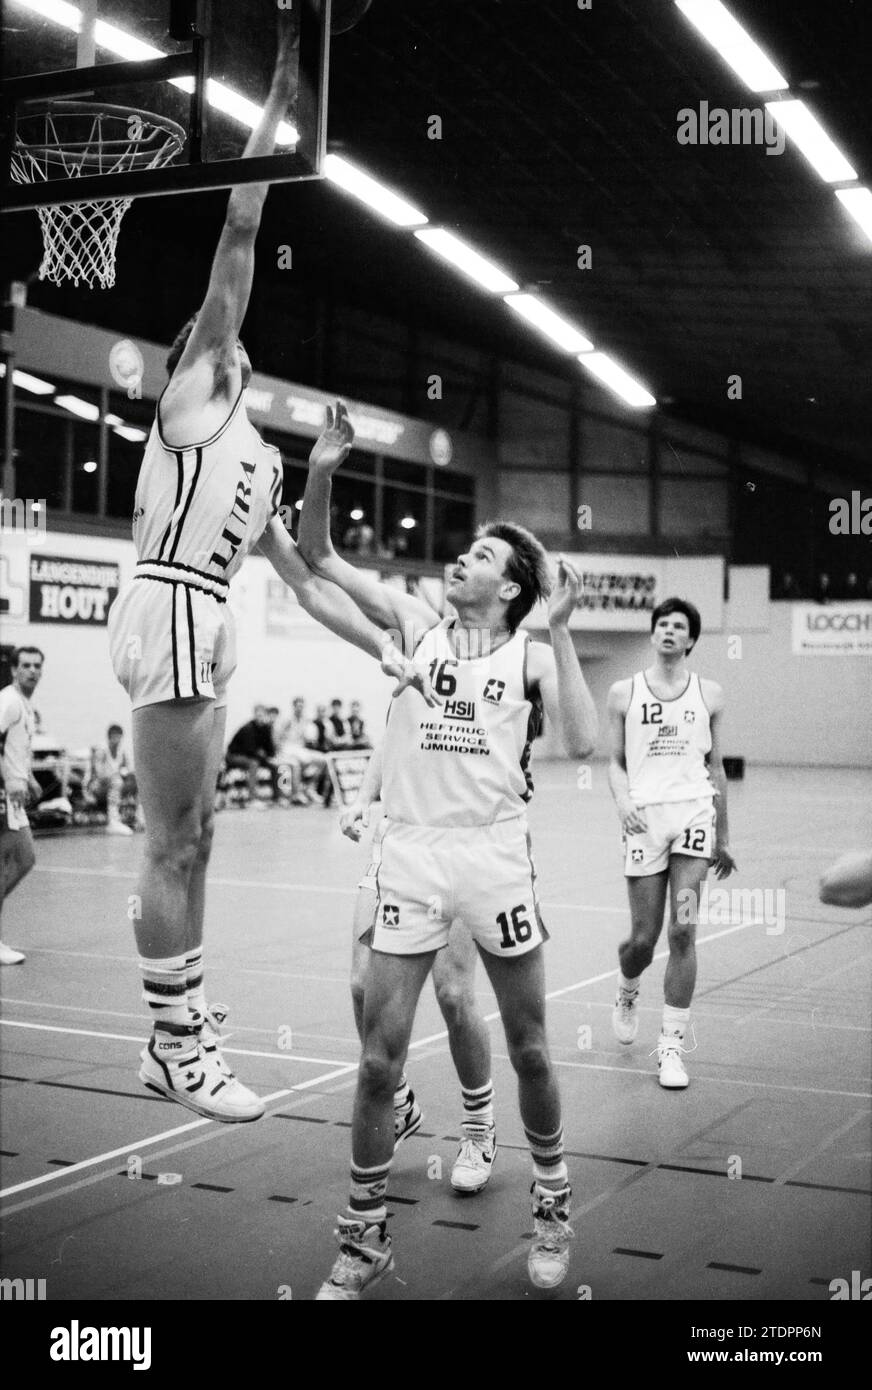 Basketball, HS IJmuiden - Leiden, 19-04-1991, Whizgle News from the Past, Tailored for the Future. Explore historical narratives, Dutch The Netherlands agency image with a modern perspective, bridging the gap between yesterday's events and tomorrow's insights. A timeless journey shaping the stories that shape our future Stock Photo